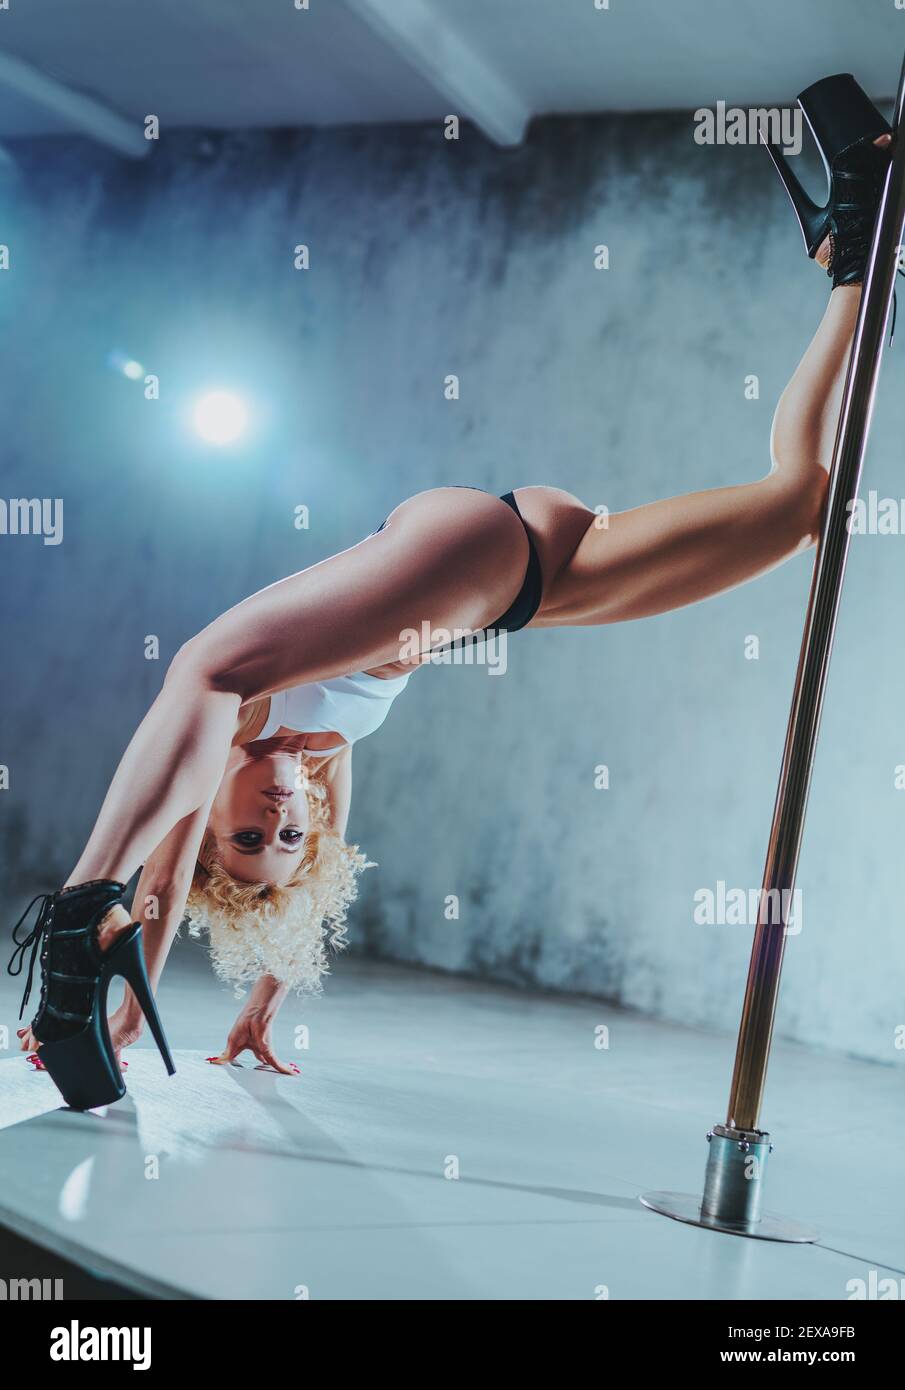 Young slim woman pole dancer in white interior in strange pose stretching legs Stock Photo